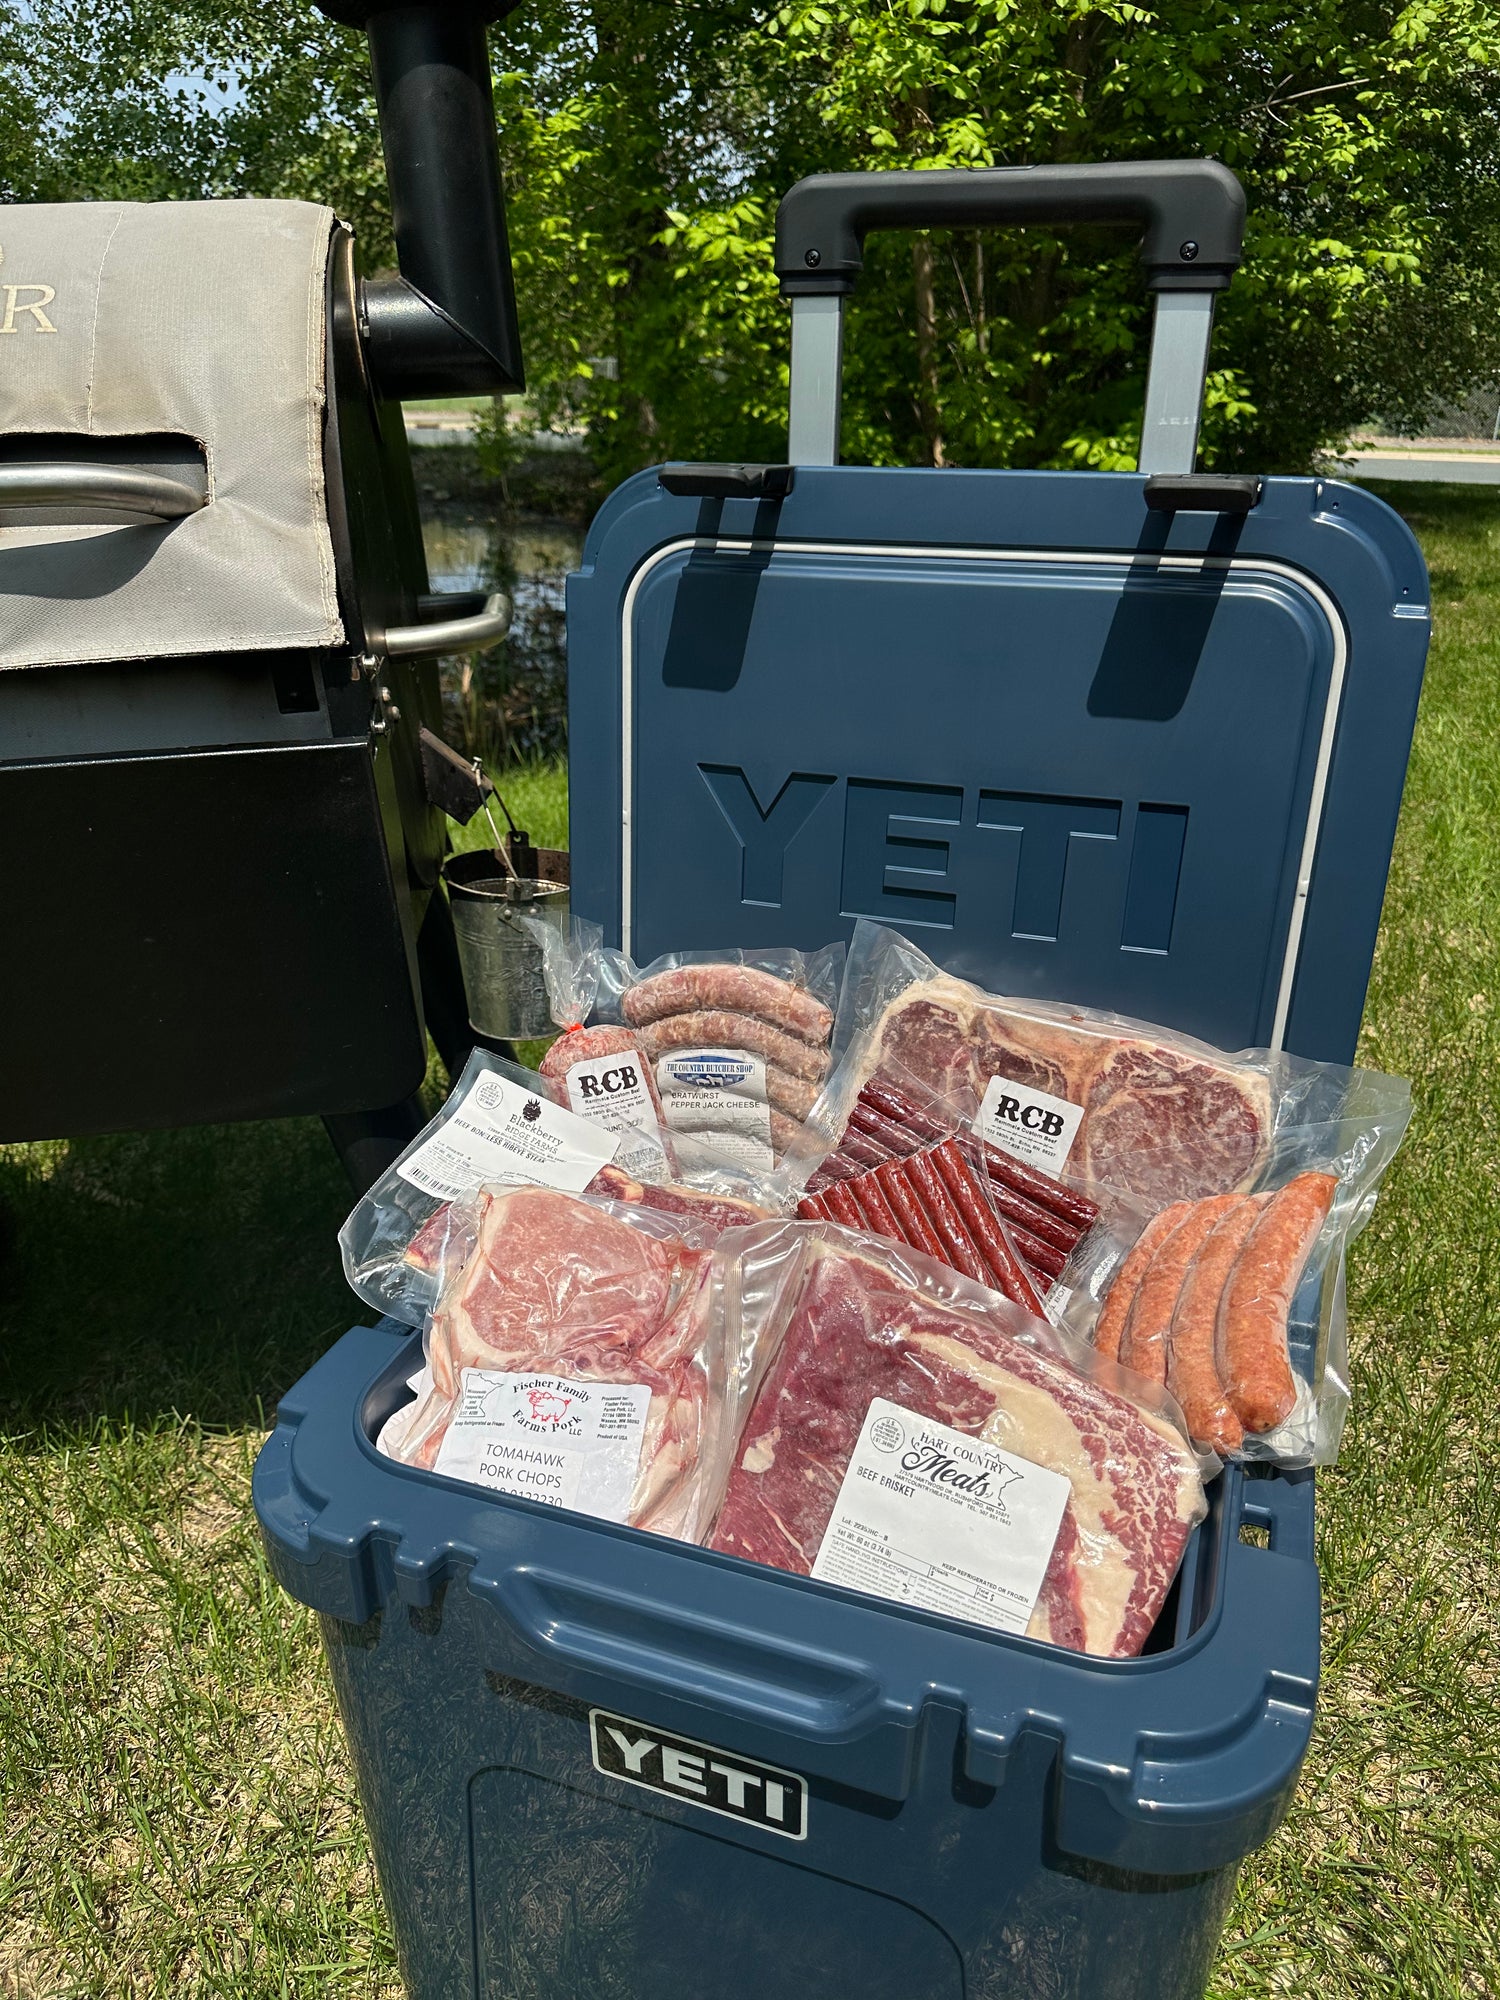 A picture of one of our corporate gifting solutions: A Yeti Cooler filled with meats from small family farms and producers.